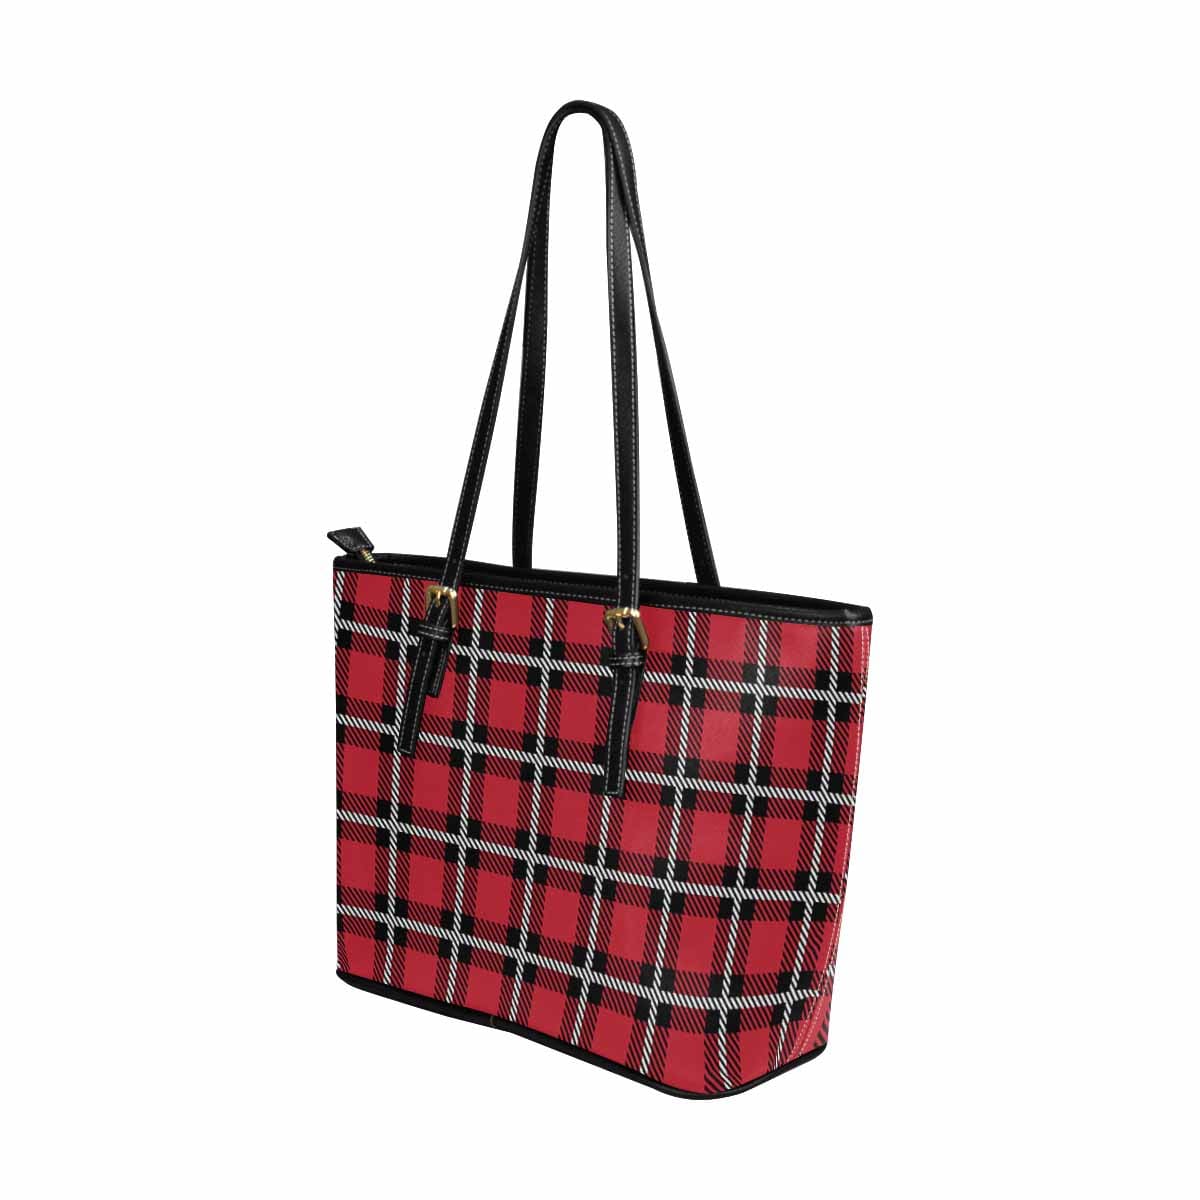 Large Leather Tote Shoulder Bag - Buffalo Plaid Red - Bags | Leather Tote Bags